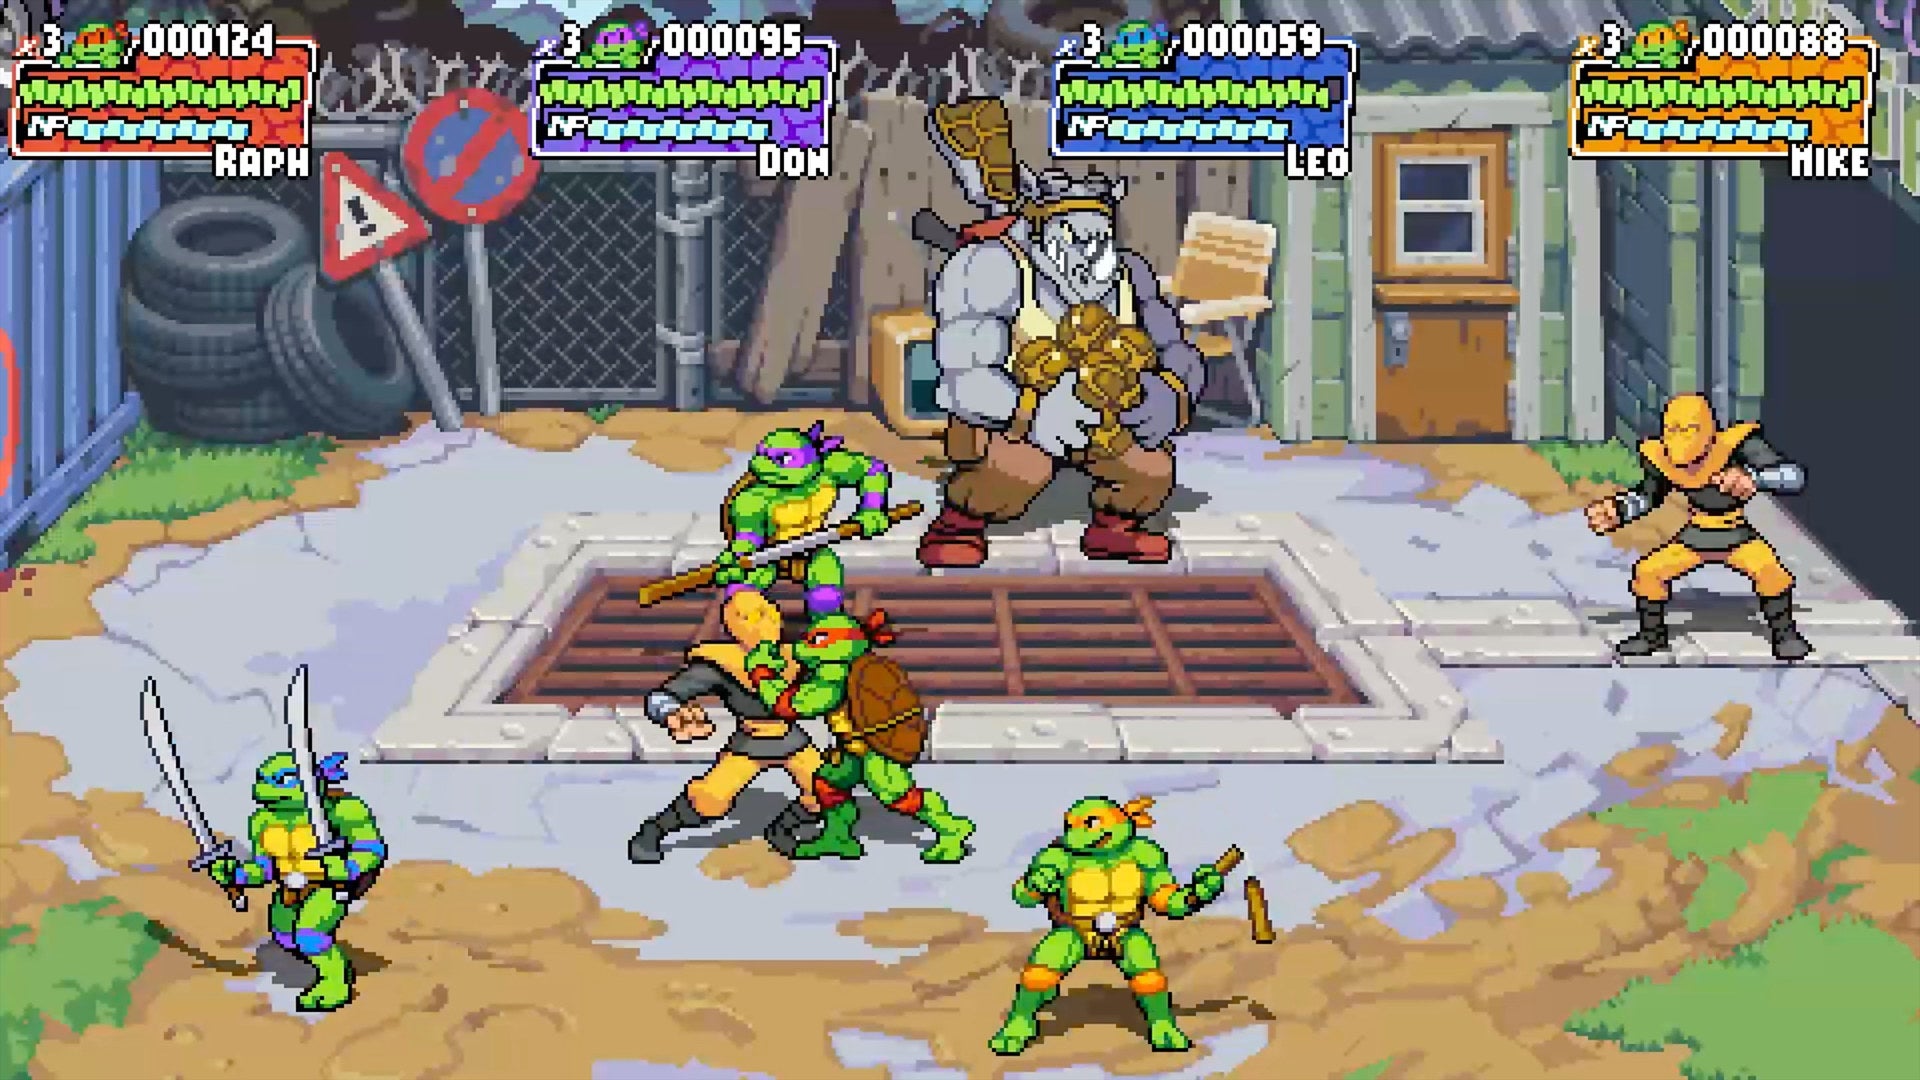 A screenshot from Teenage Mutant Ninja Turtles: Shredder's Revenge showing the heroes in a half-shell battling Rocksteady and the Foot.